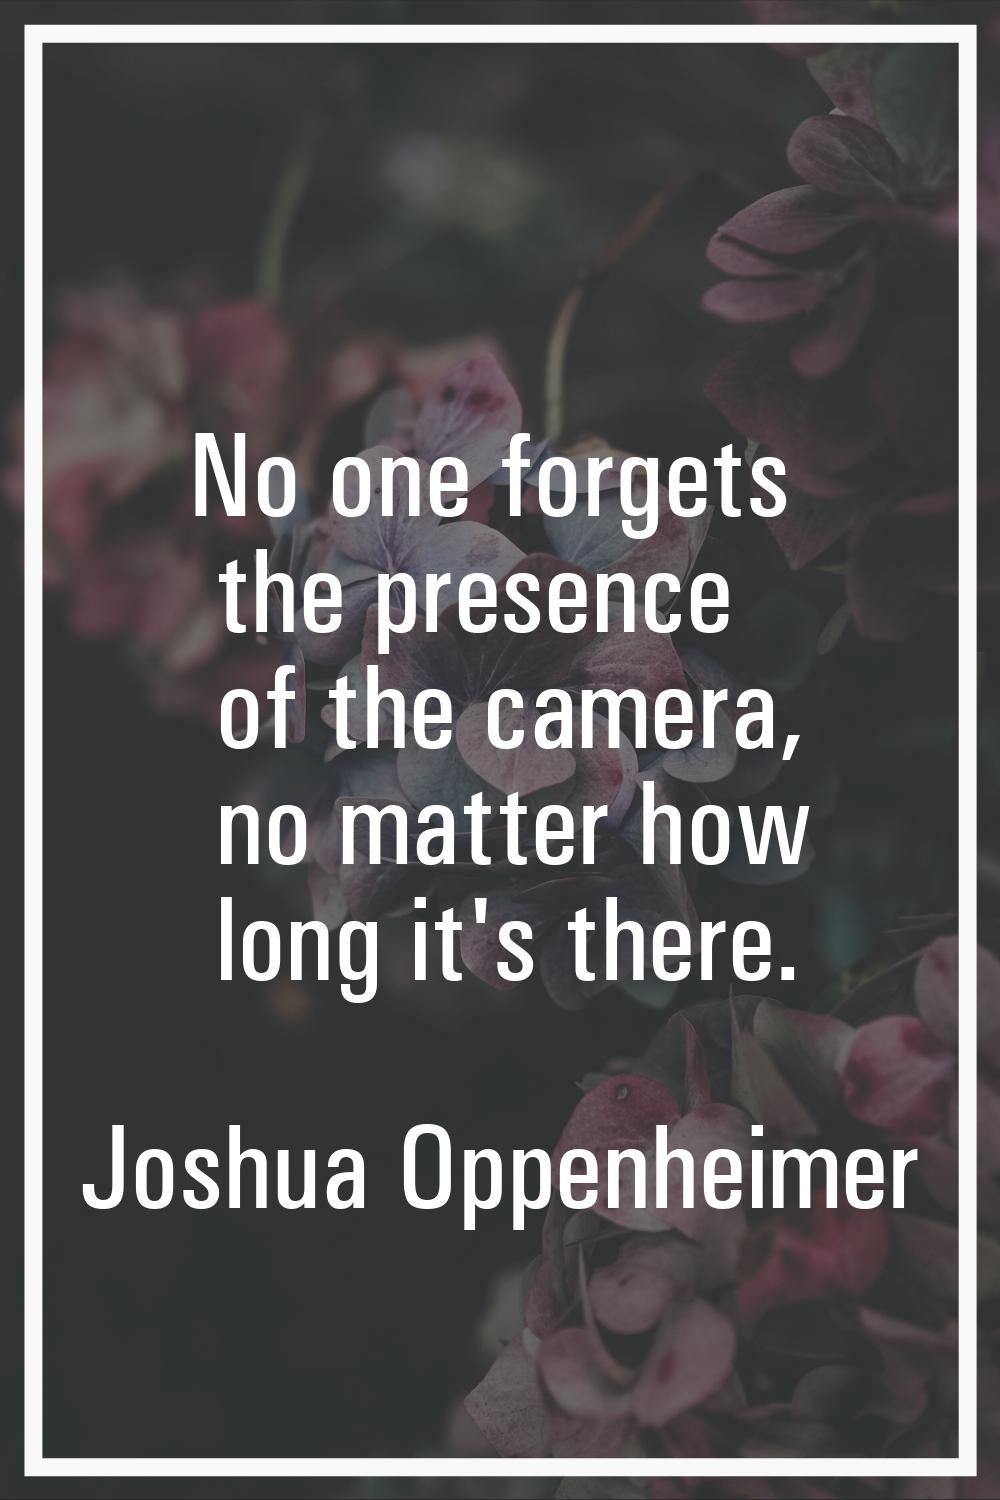 No one forgets the presence of the camera, no matter how long it's there.